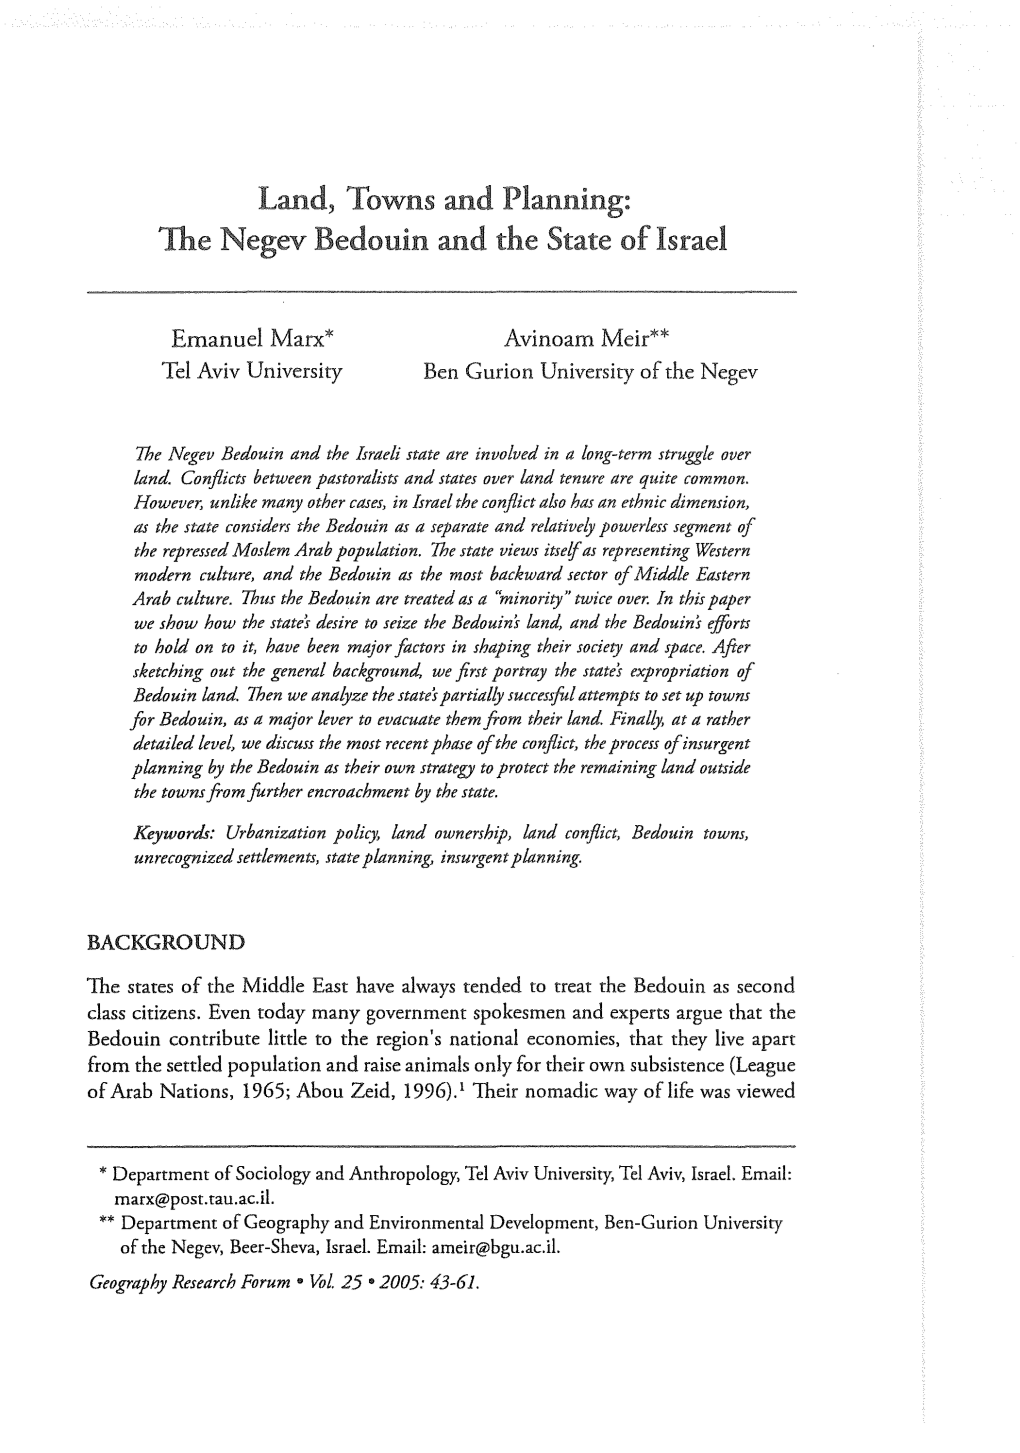 Land, Towns and Planning: the Negev Bedouin and the State of Israel